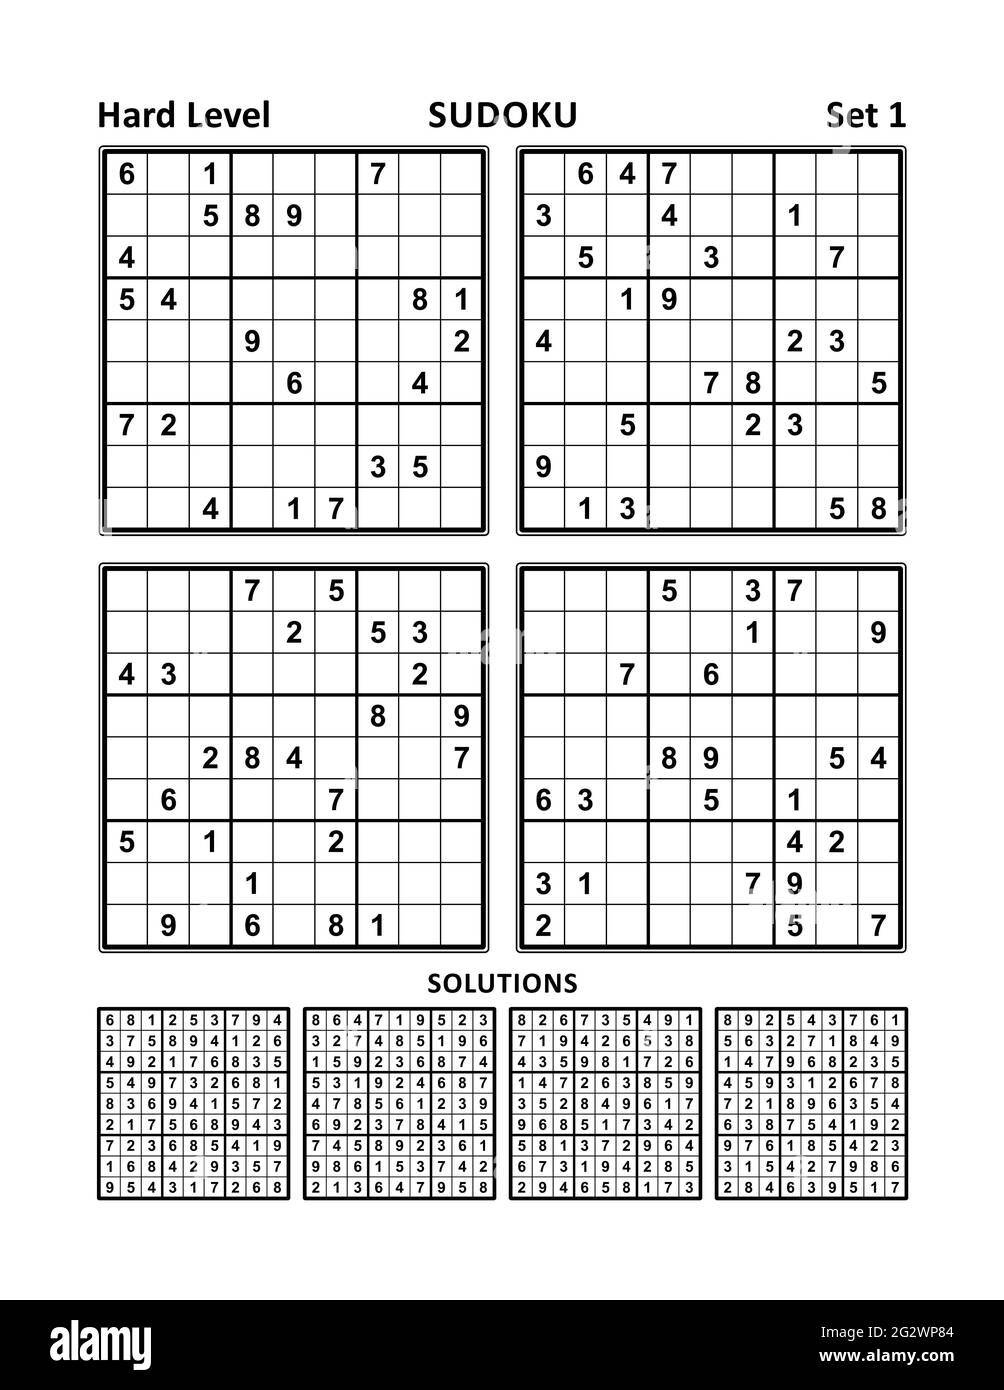 Four sudoku games of hard level, with answers. Set 1. Stock Photo